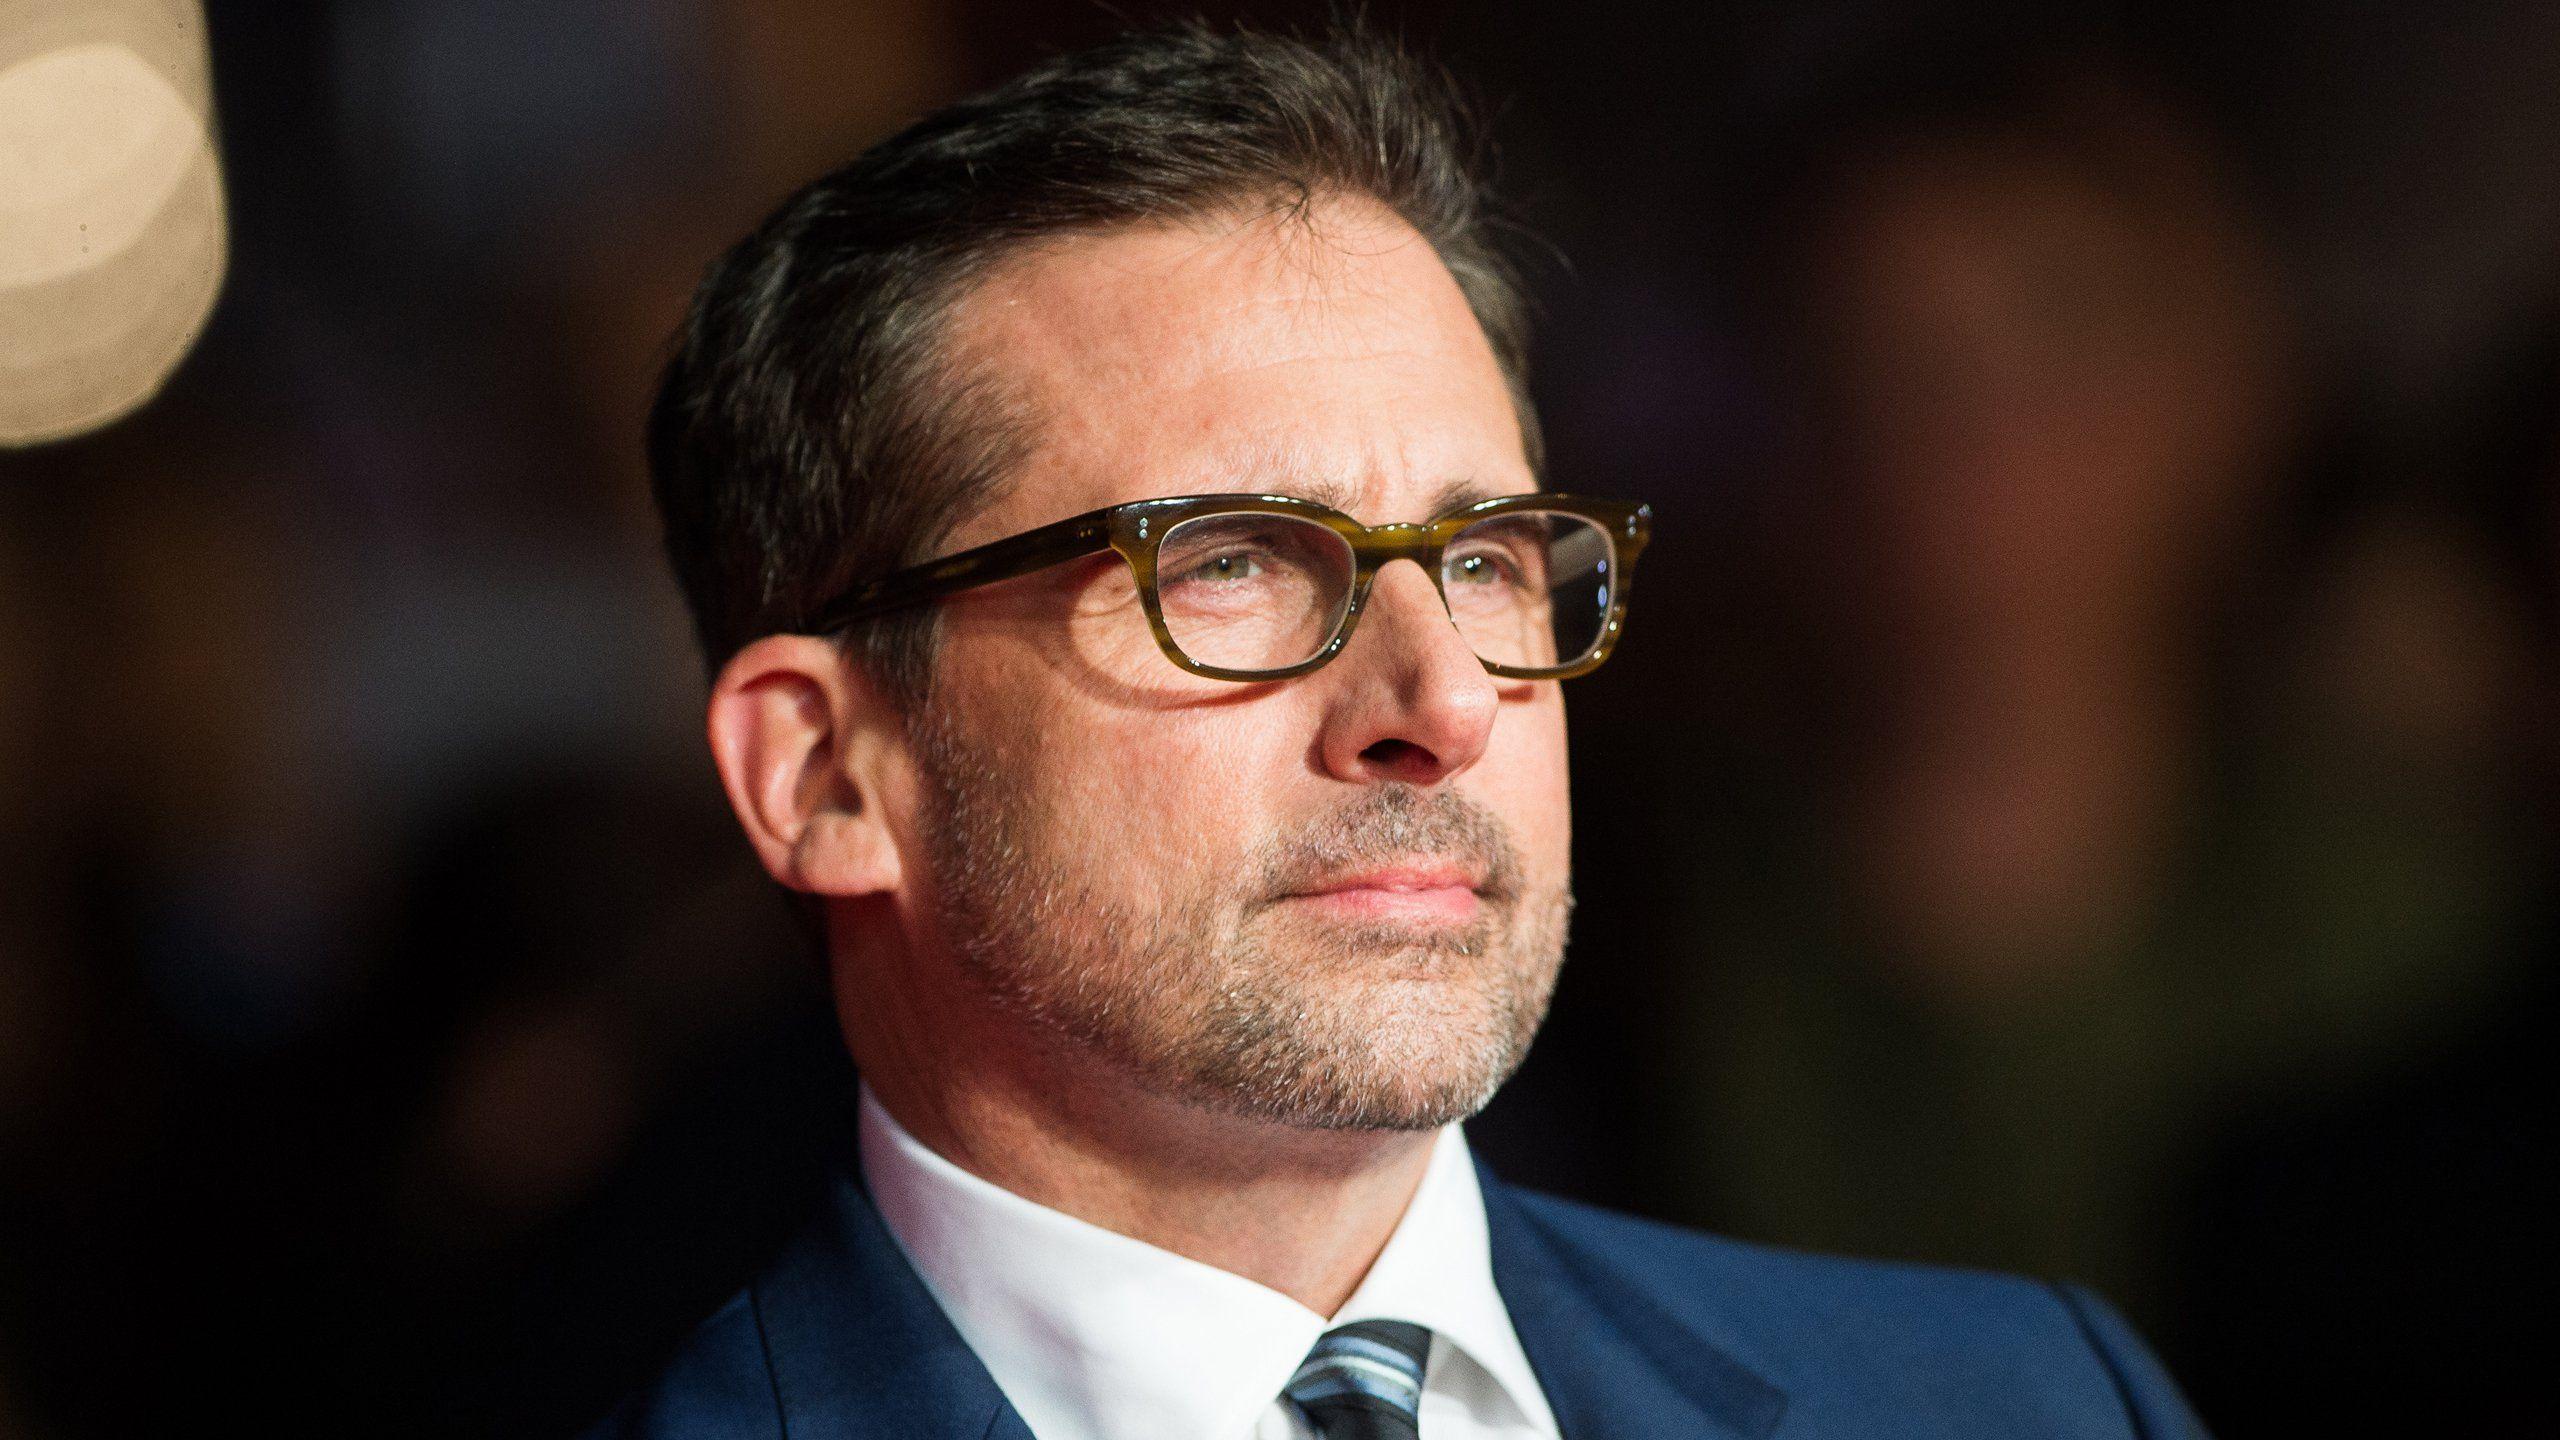 Why Steve Carell Has Left Comedy Behind